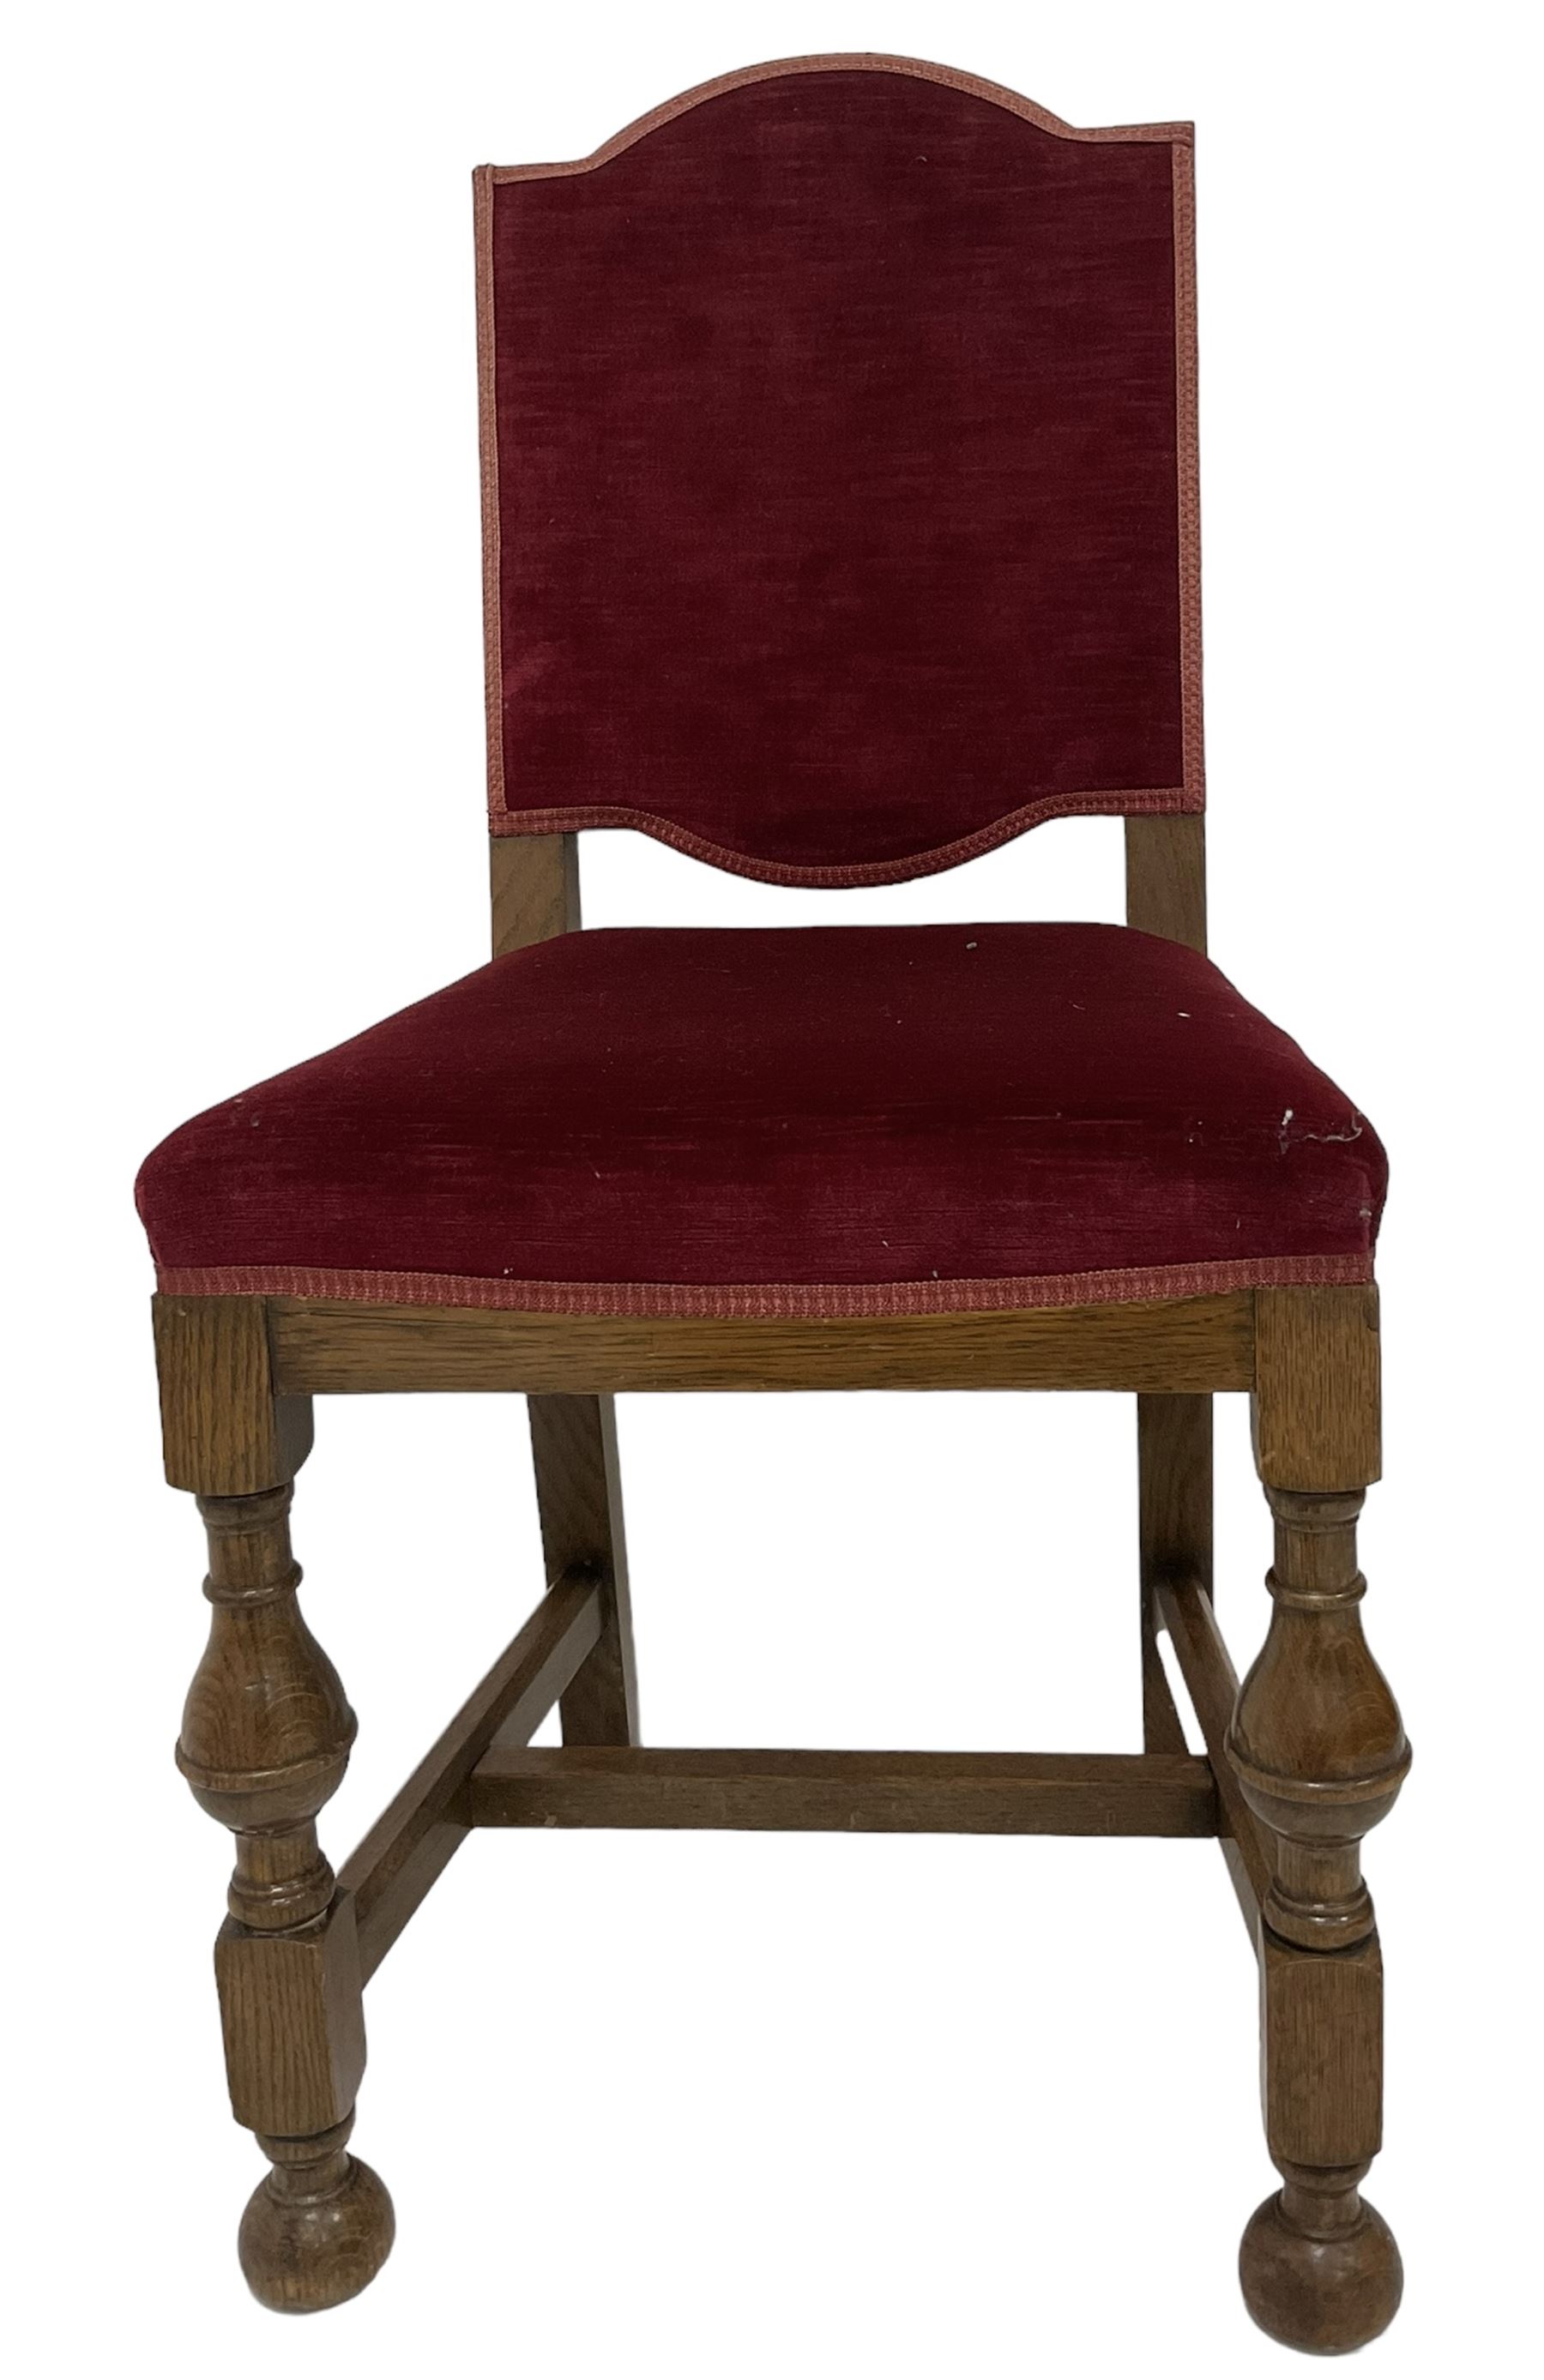 19th century oak armchair or carver dining chair - Image 6 of 9